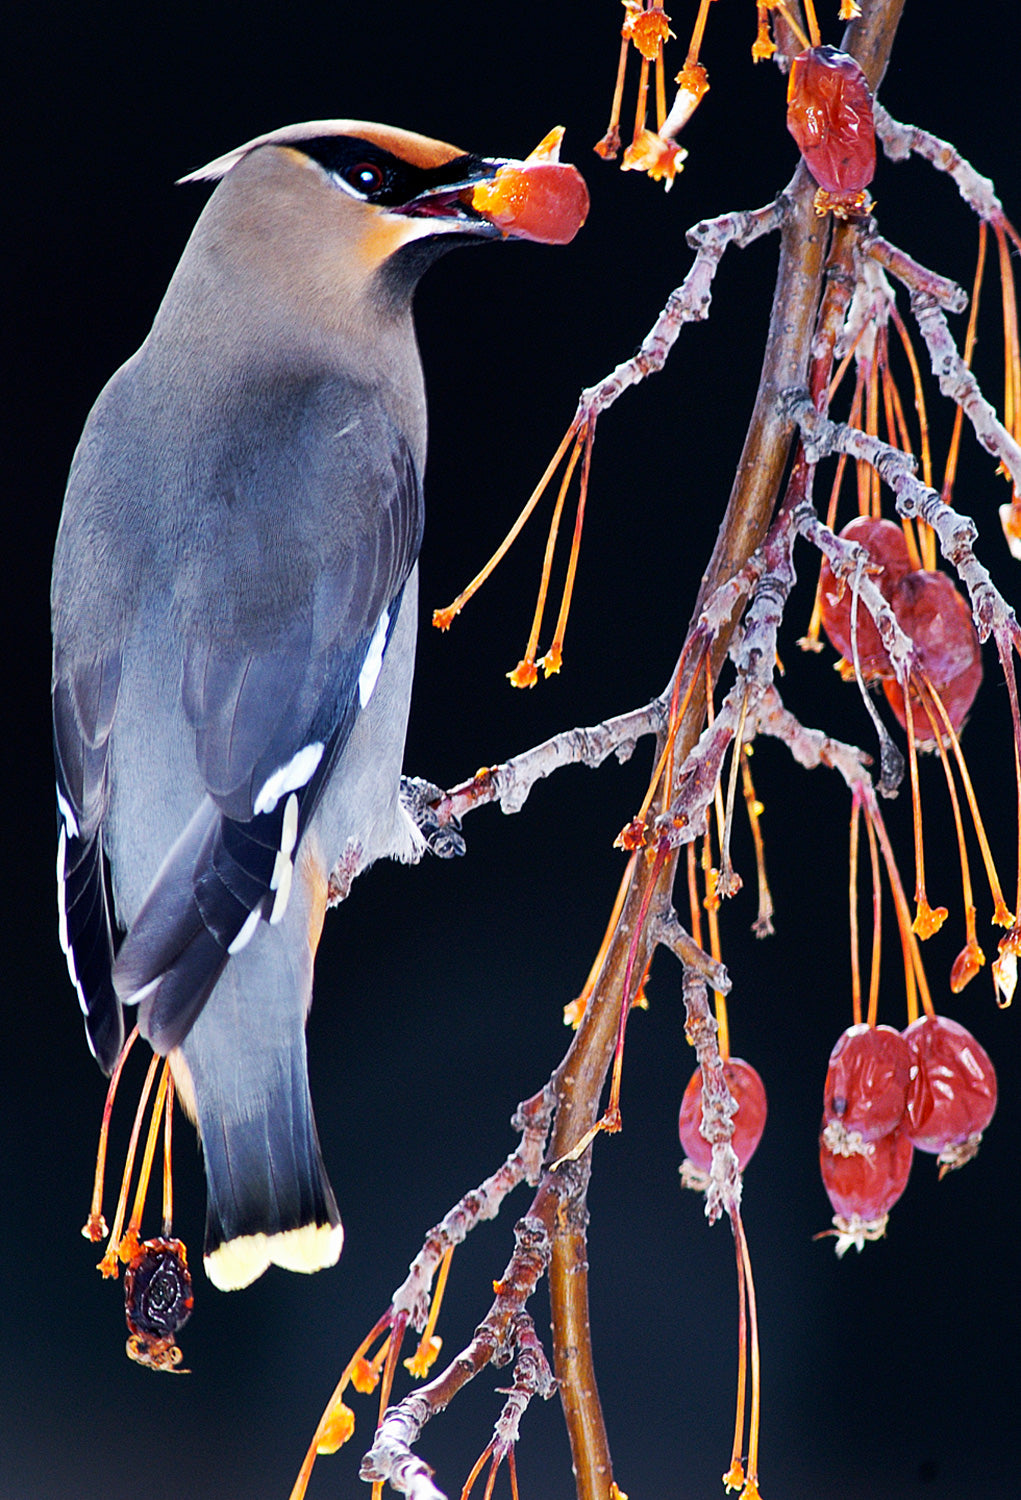 A bohemian waxwing bird eating berries off of an icy tree branch. End of image description.